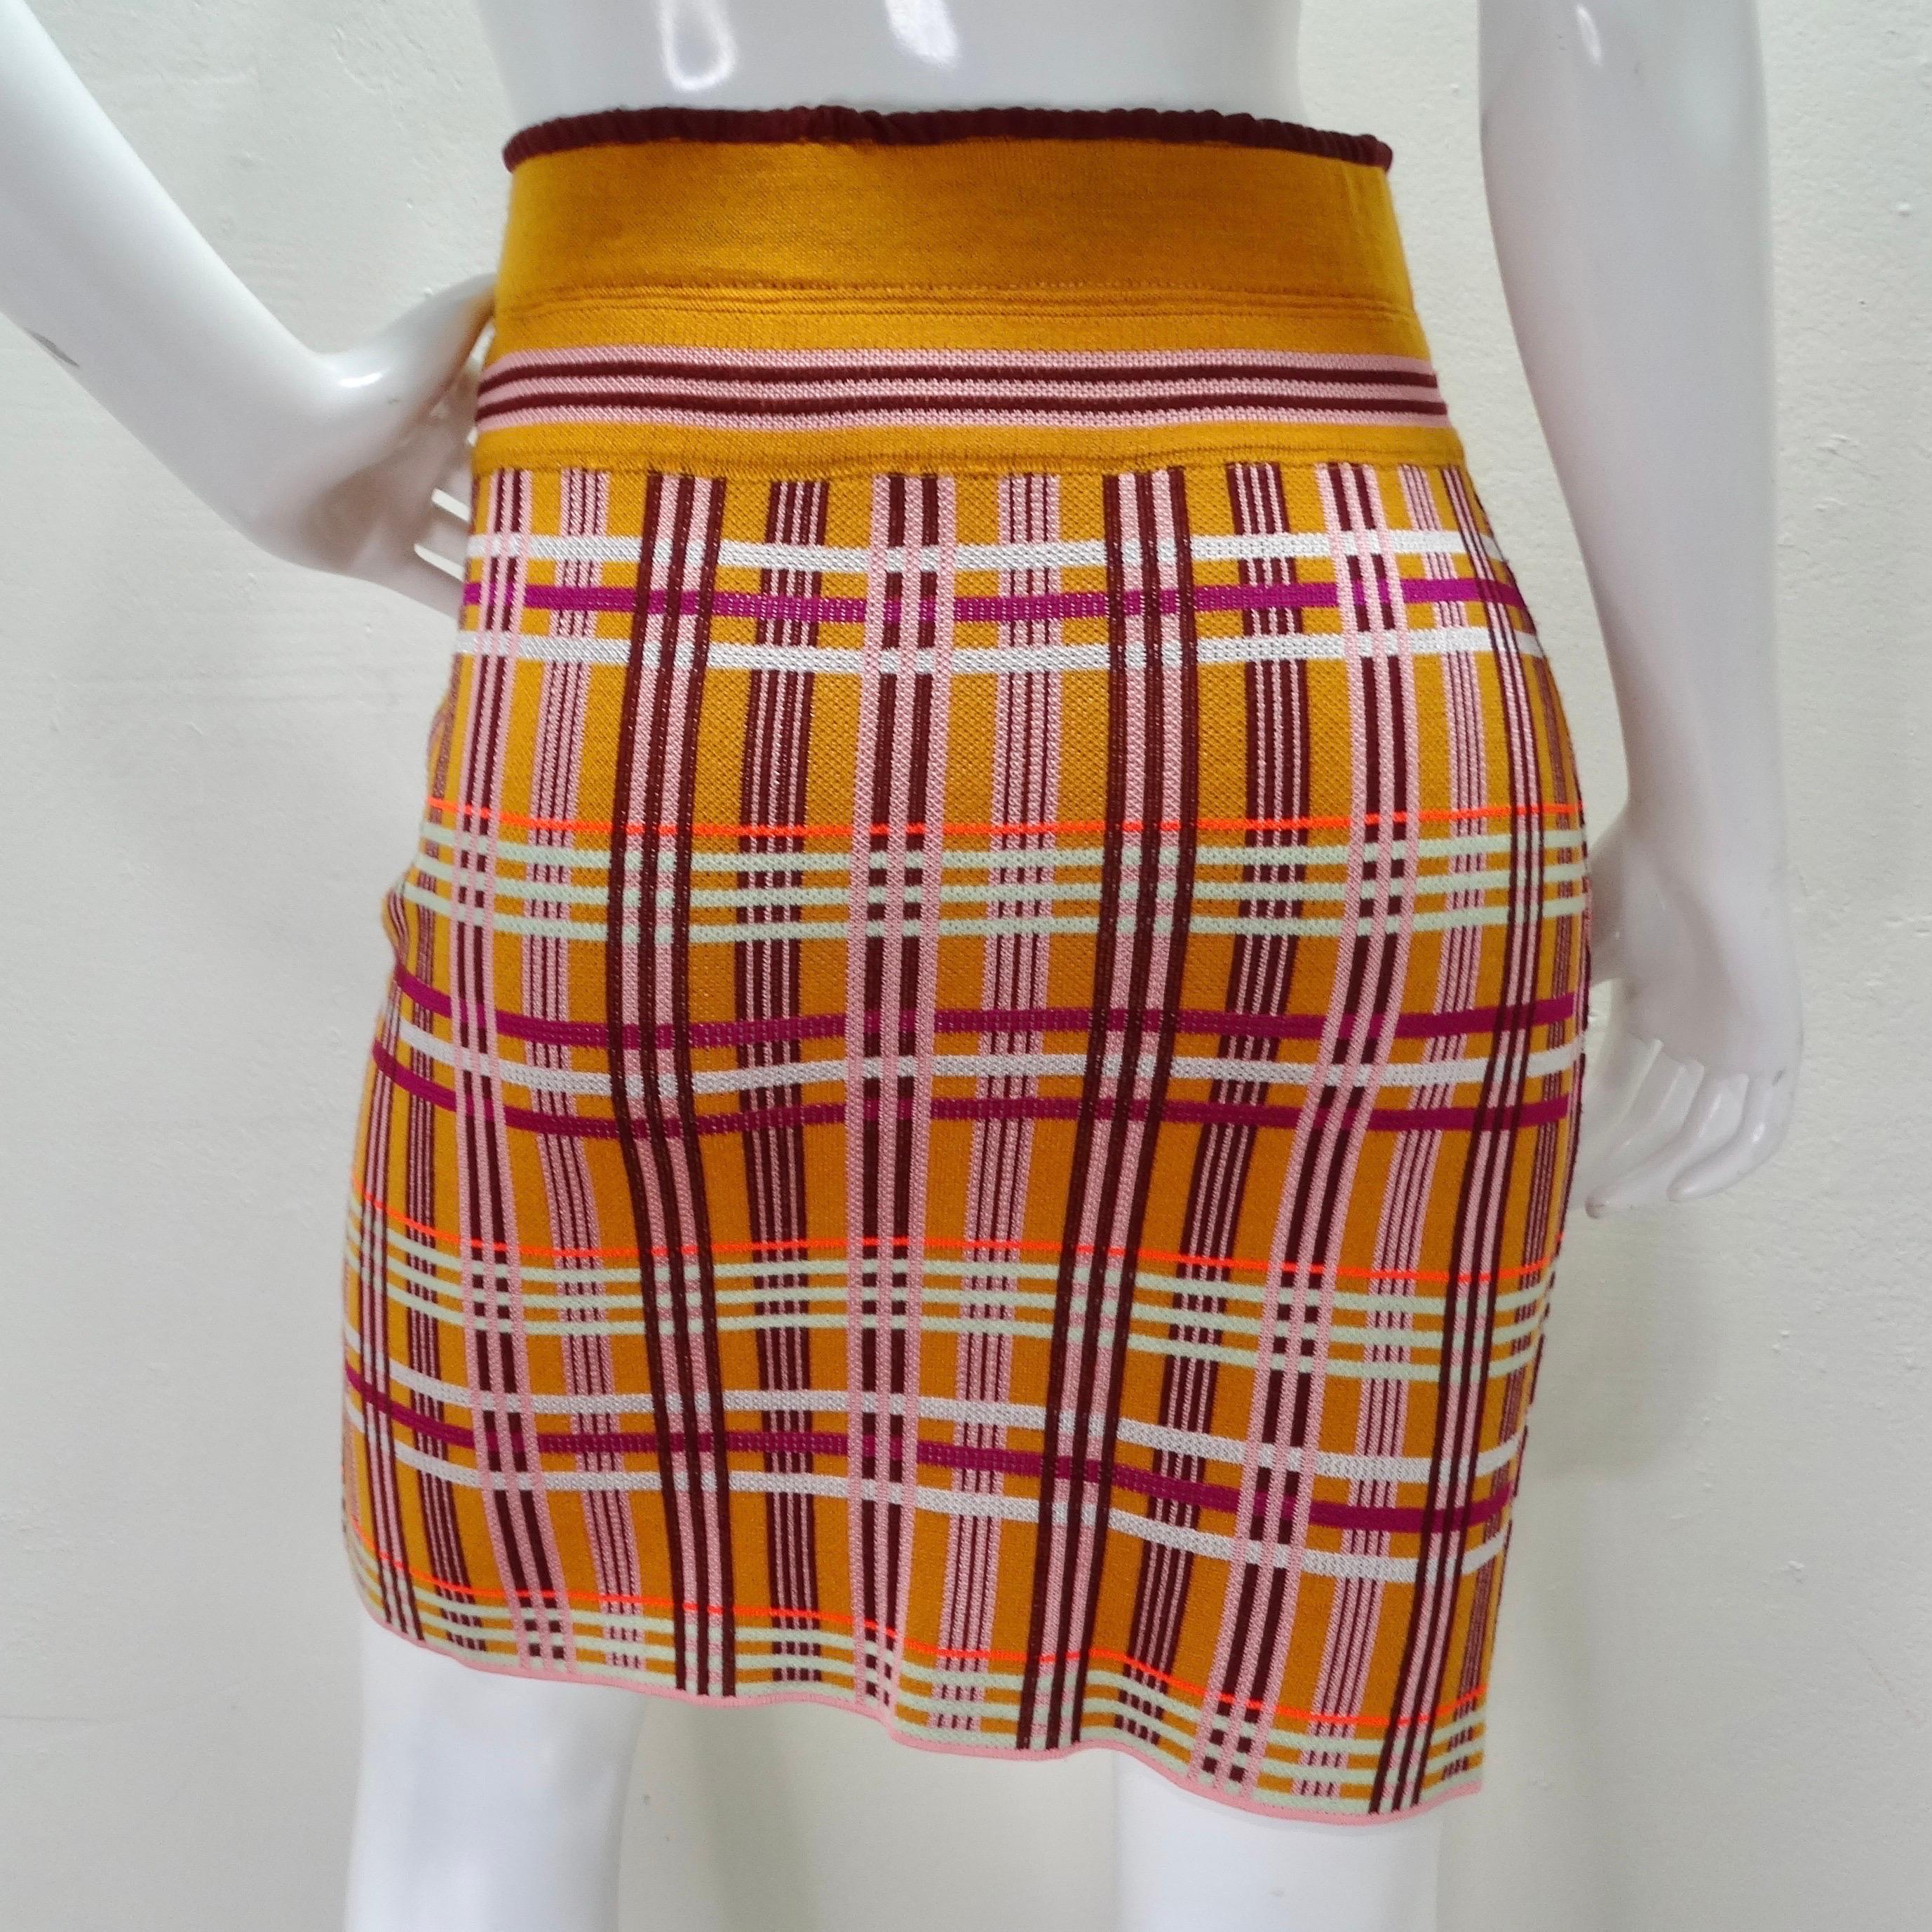 Missoni AW21 Plaid Pencil Skirt In Excellent Condition For Sale In Scottsdale, AZ